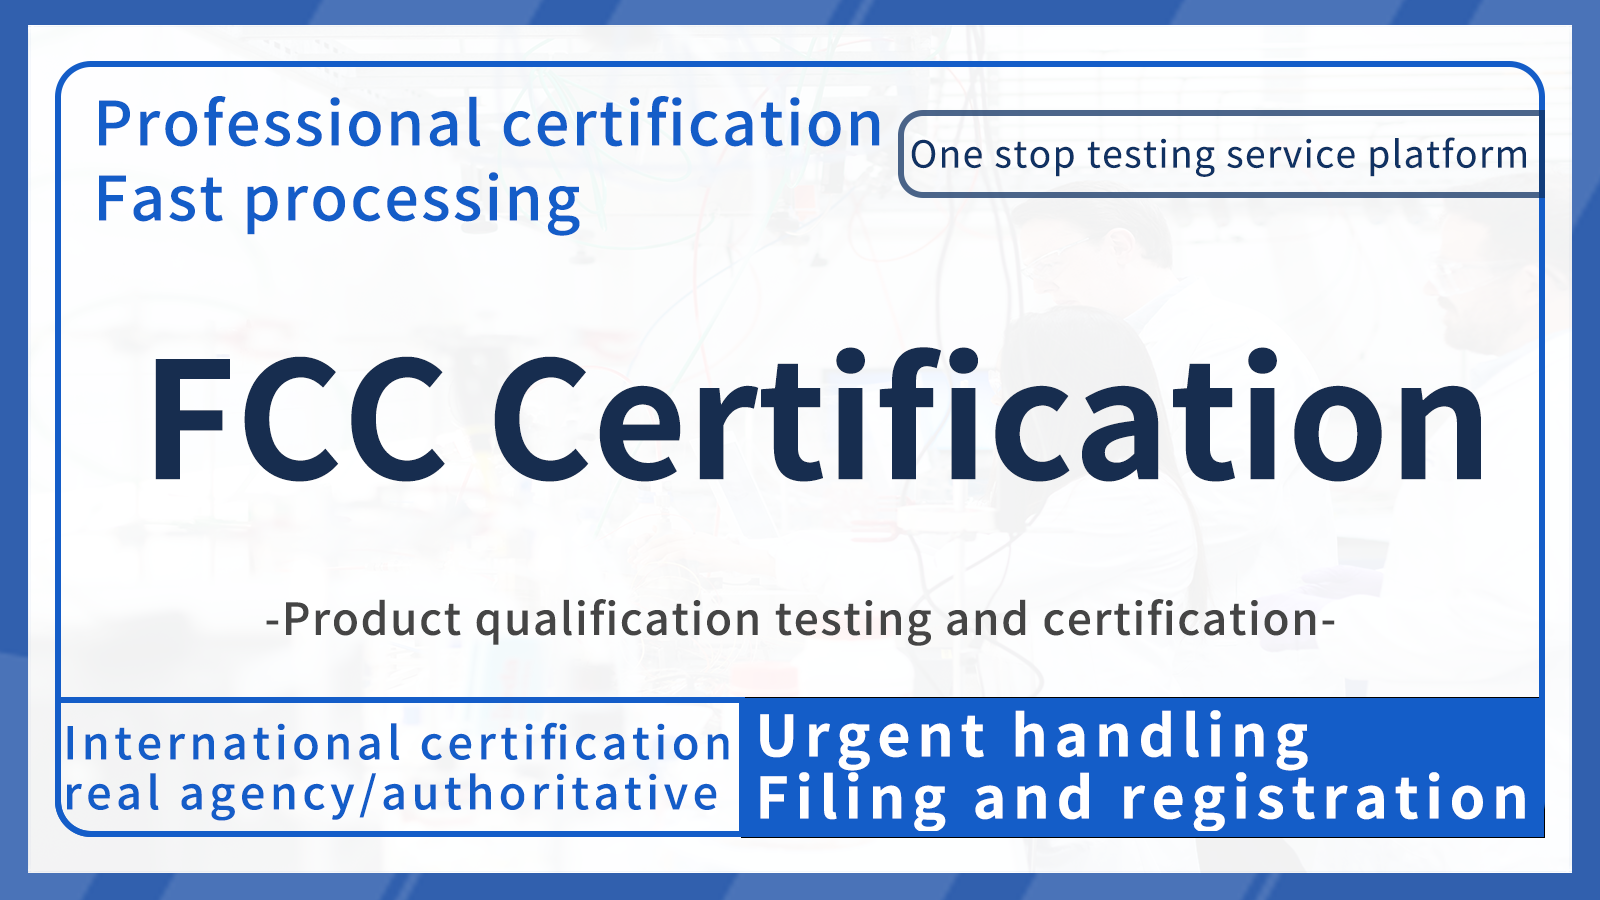 What do you need to do to apply for FCC certification in the United States?